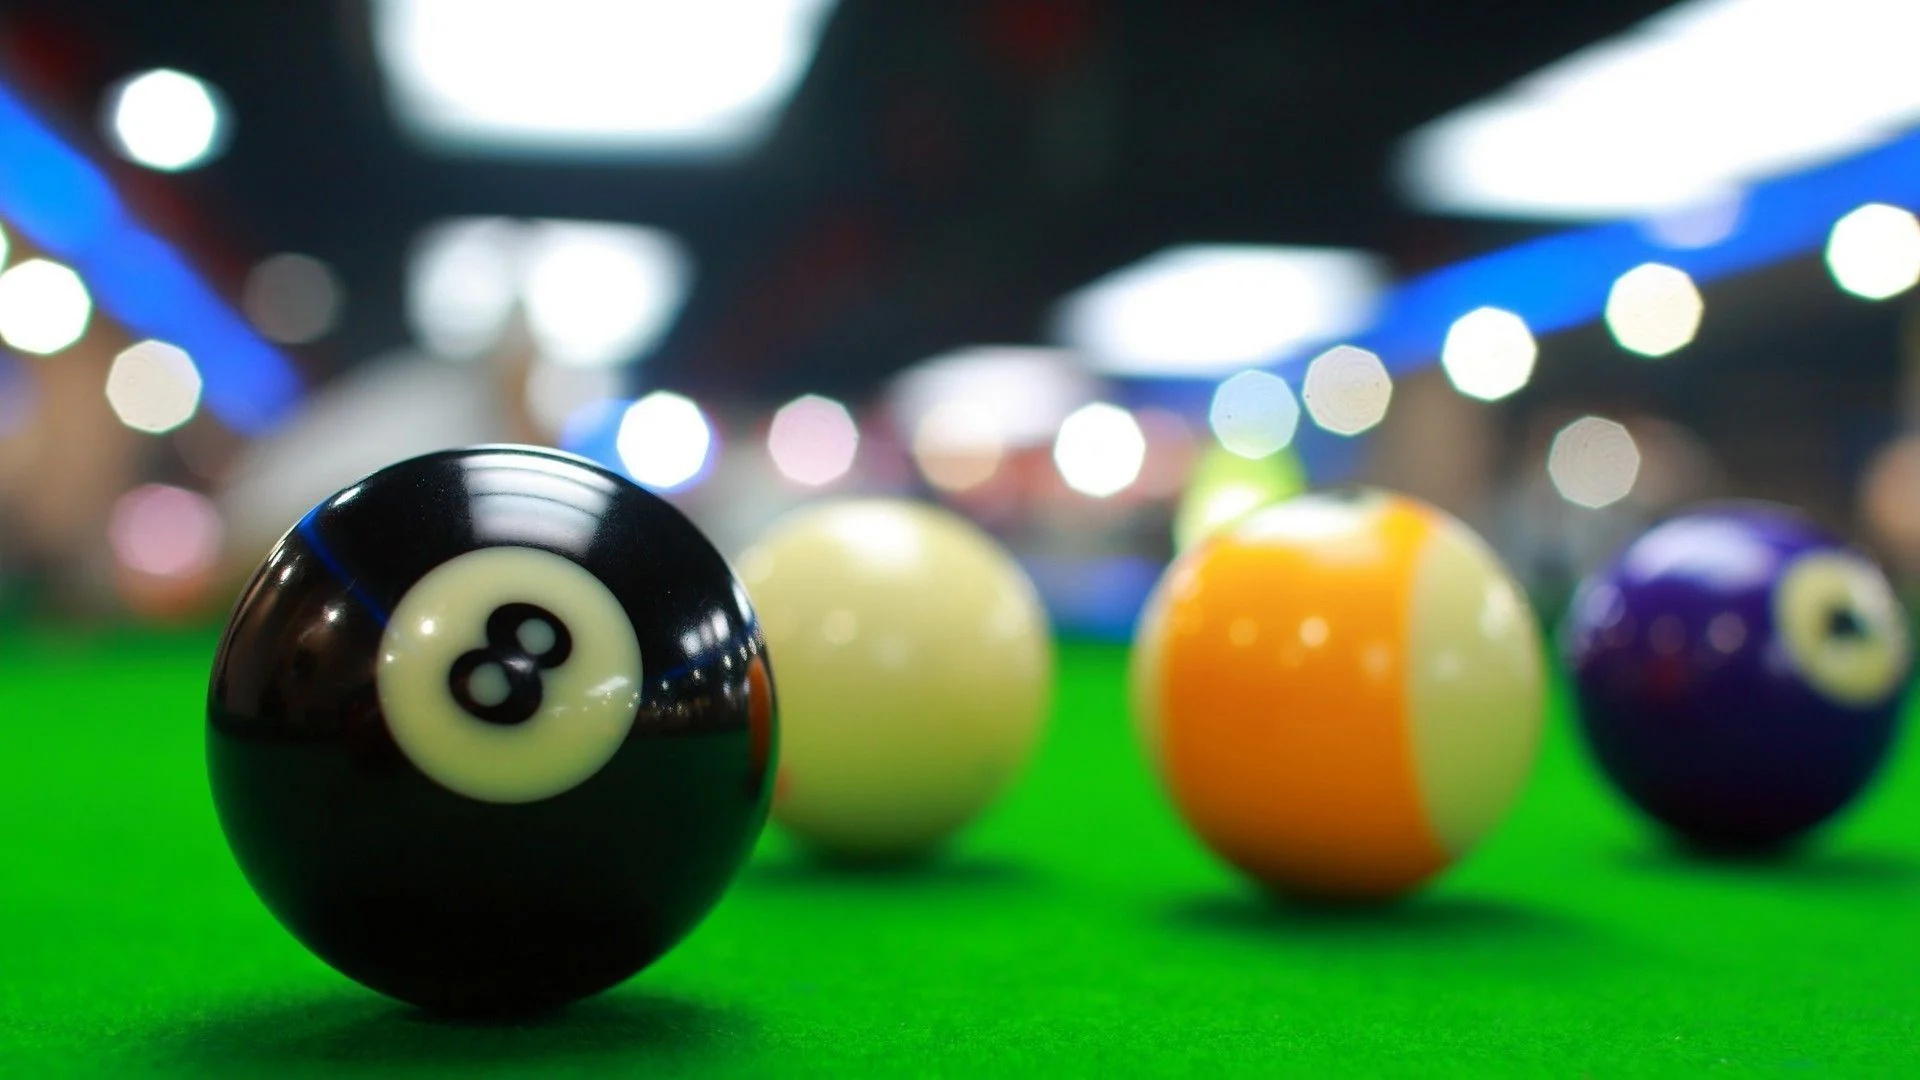 Billiards: The solid black object ball, The symbol of the eight-ball pool game, Pool stick. 1920x1080 Full HD Background.